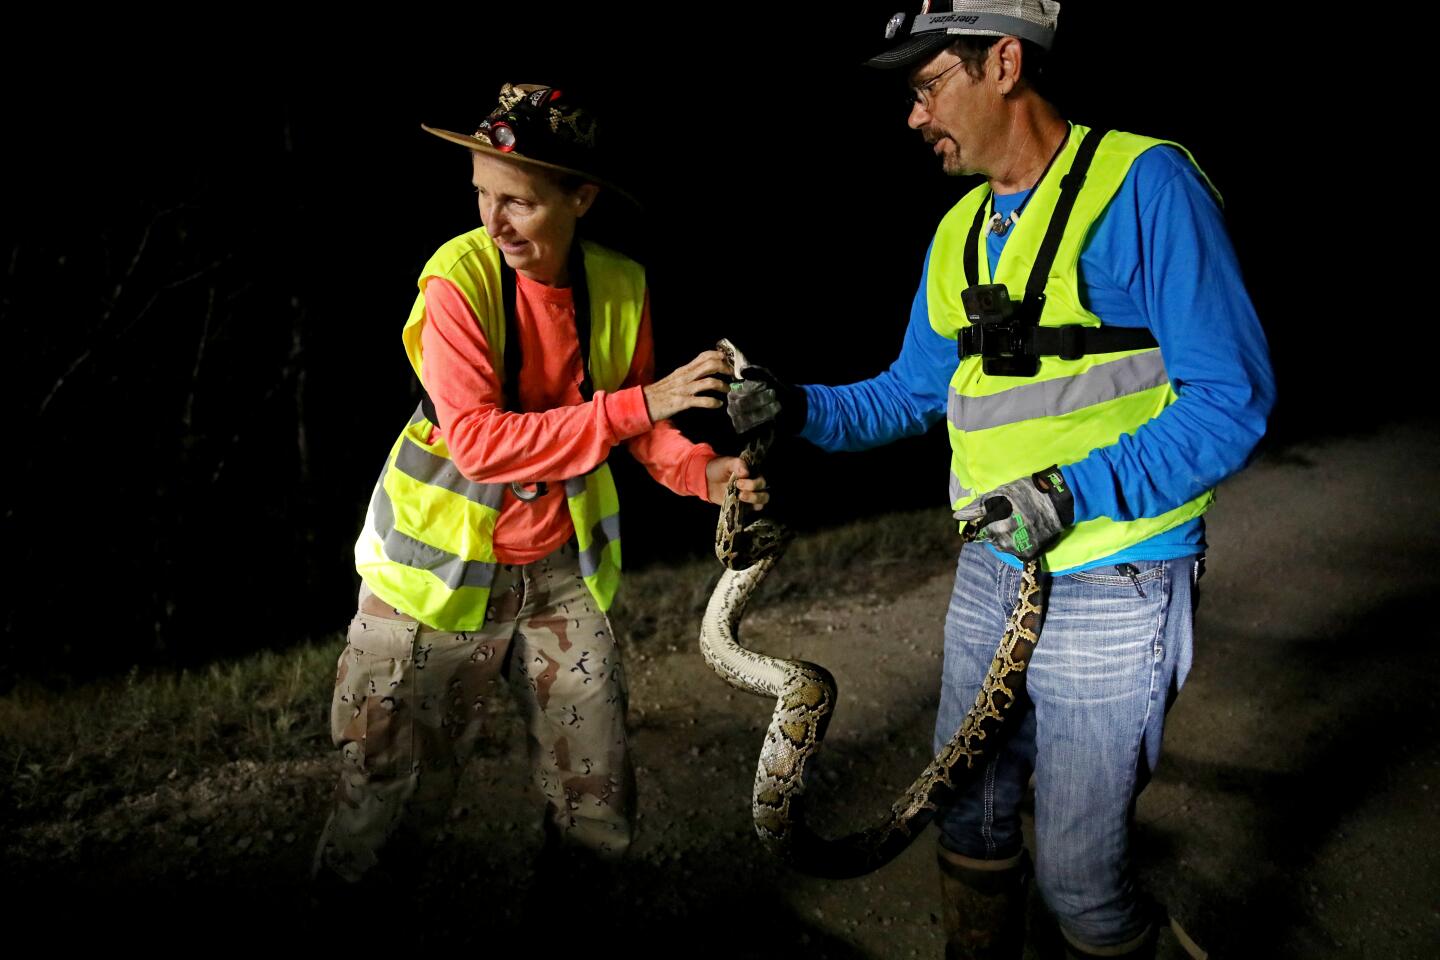 Two people in reflective vests hold a large snake